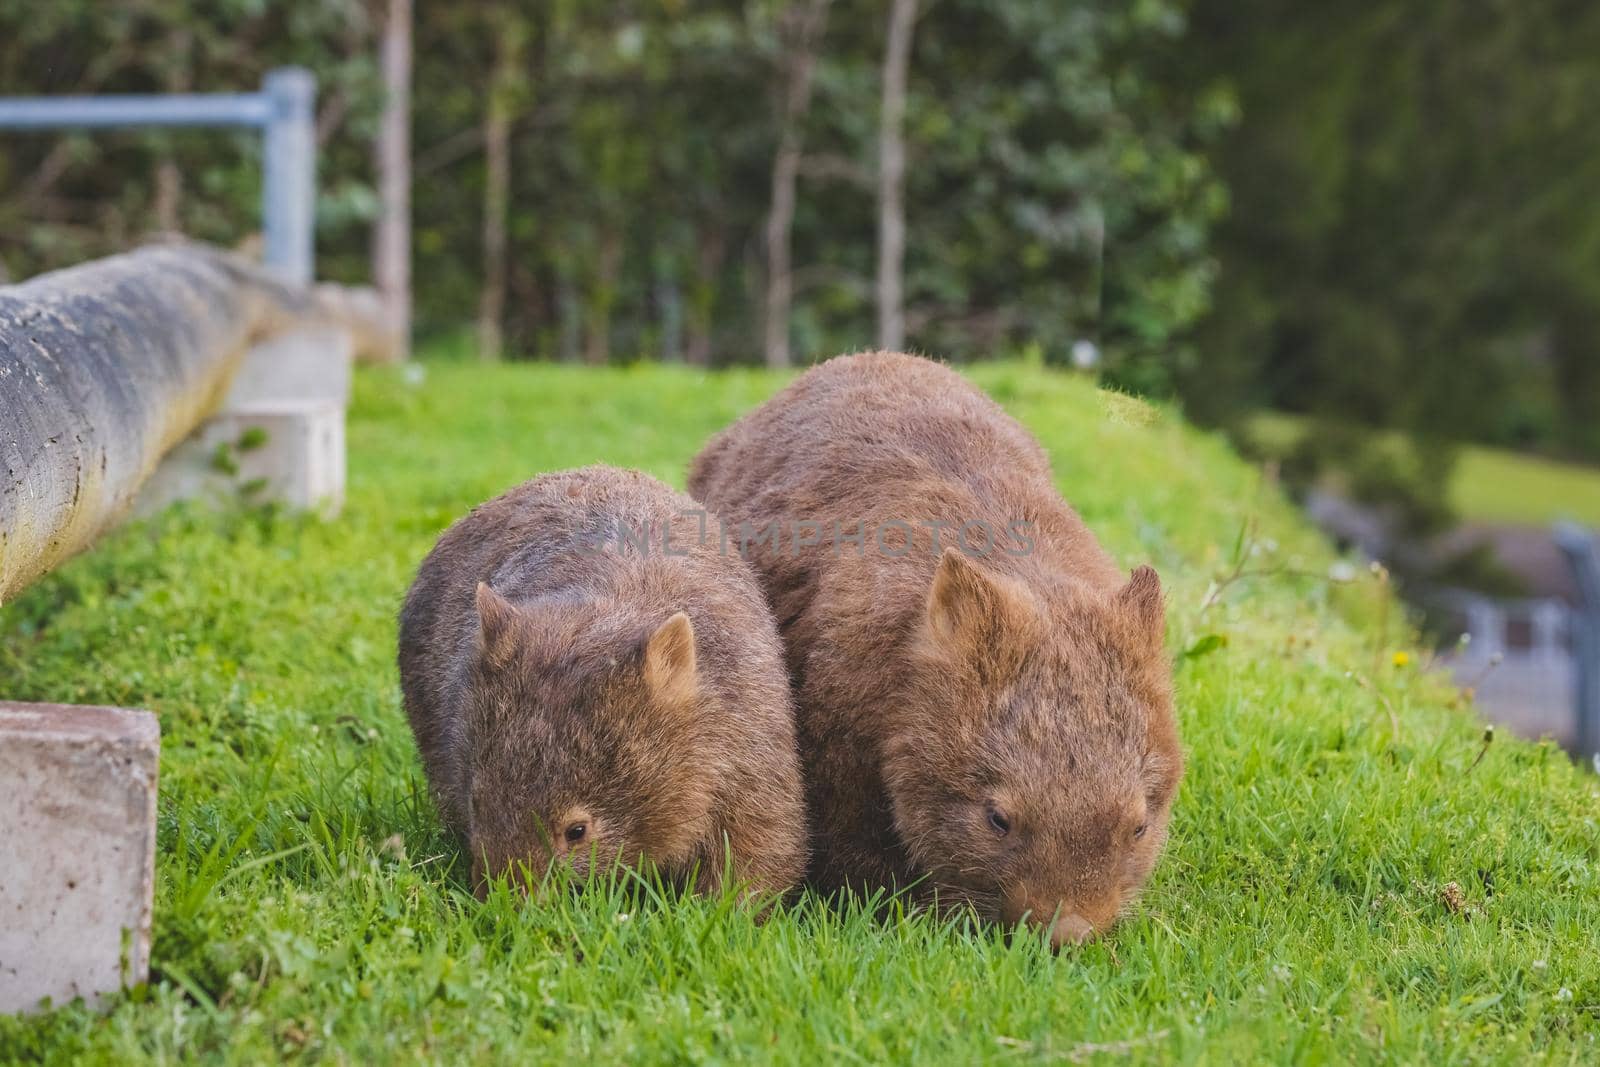 Wombat and her baby grazing on grass at Bendeela Campground. High quality photo